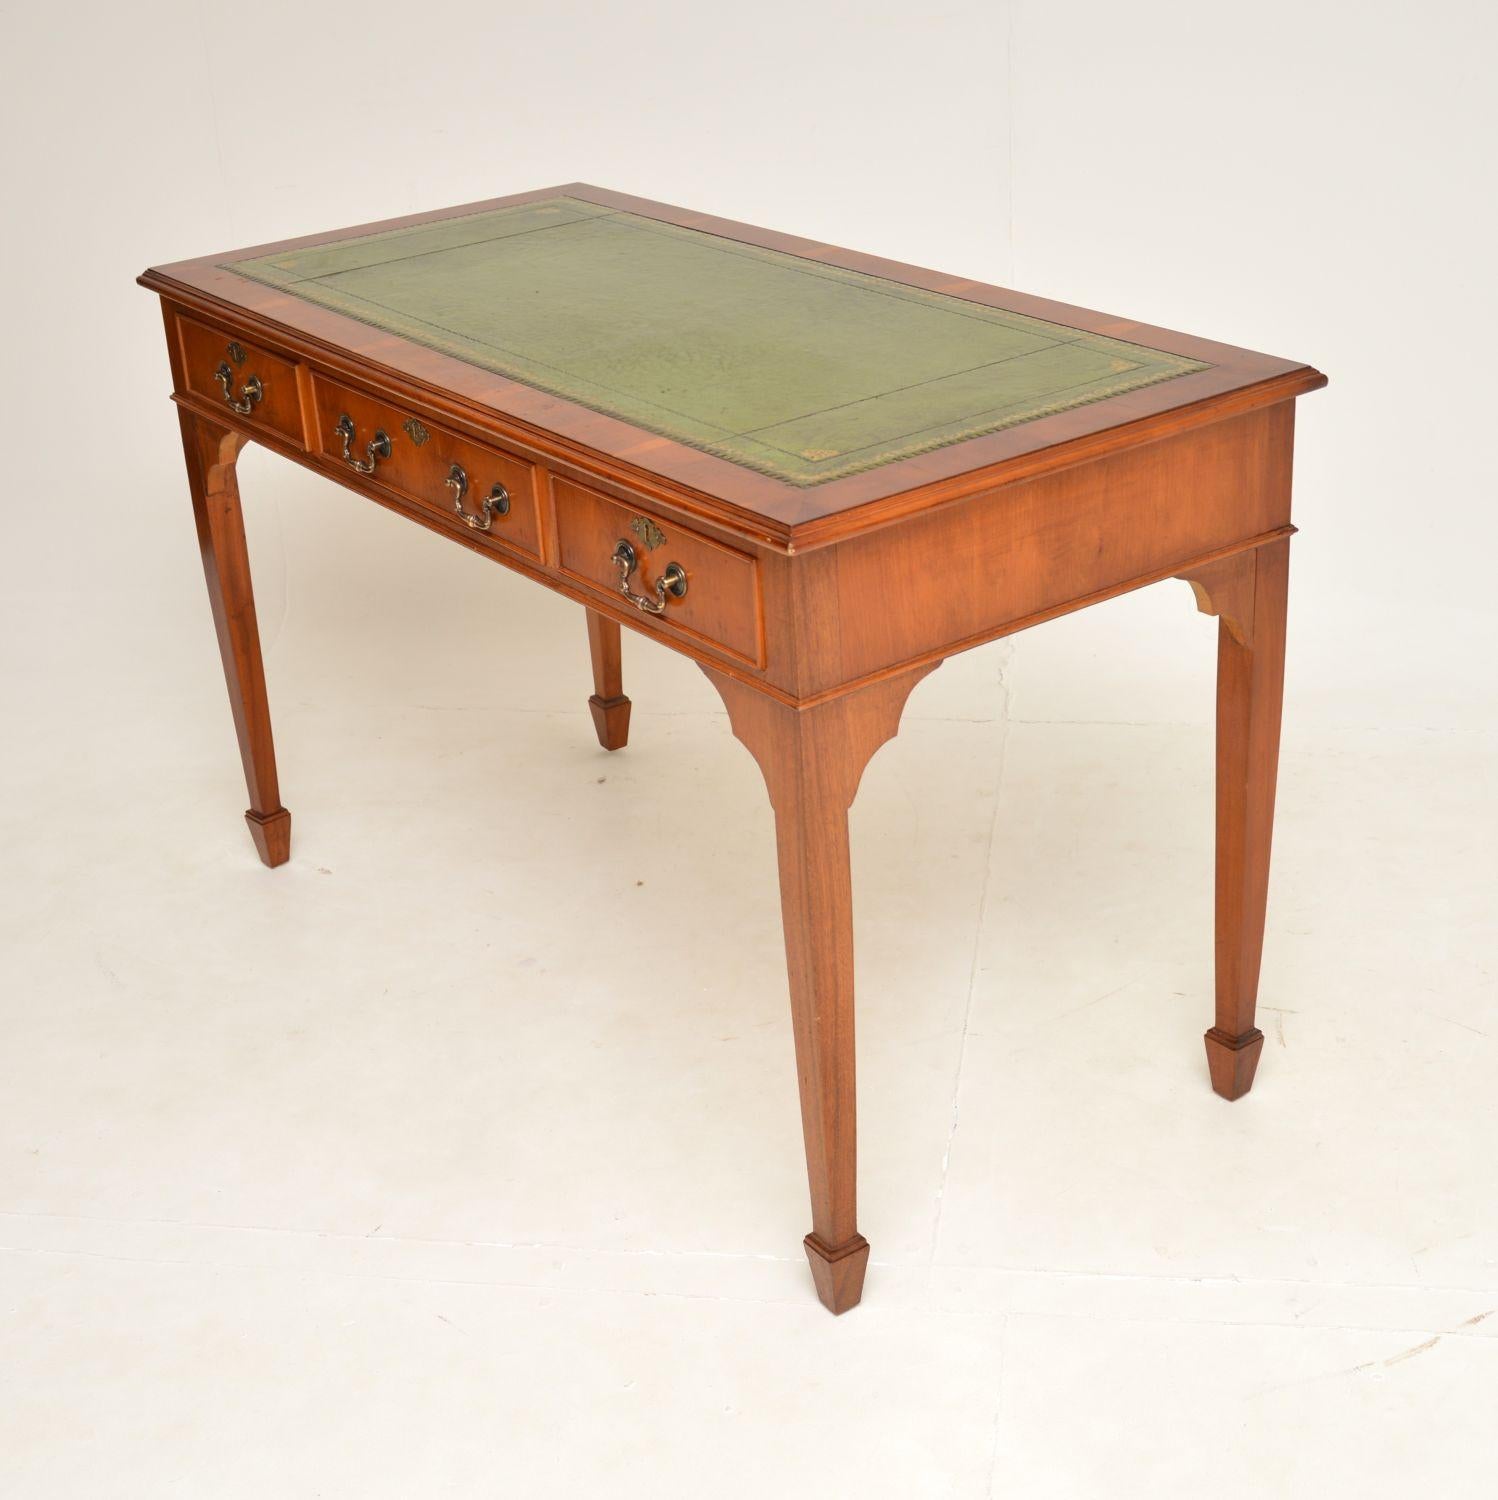 British Antique Georgian Style Yew Wood Leather Top Desk / Writing Table